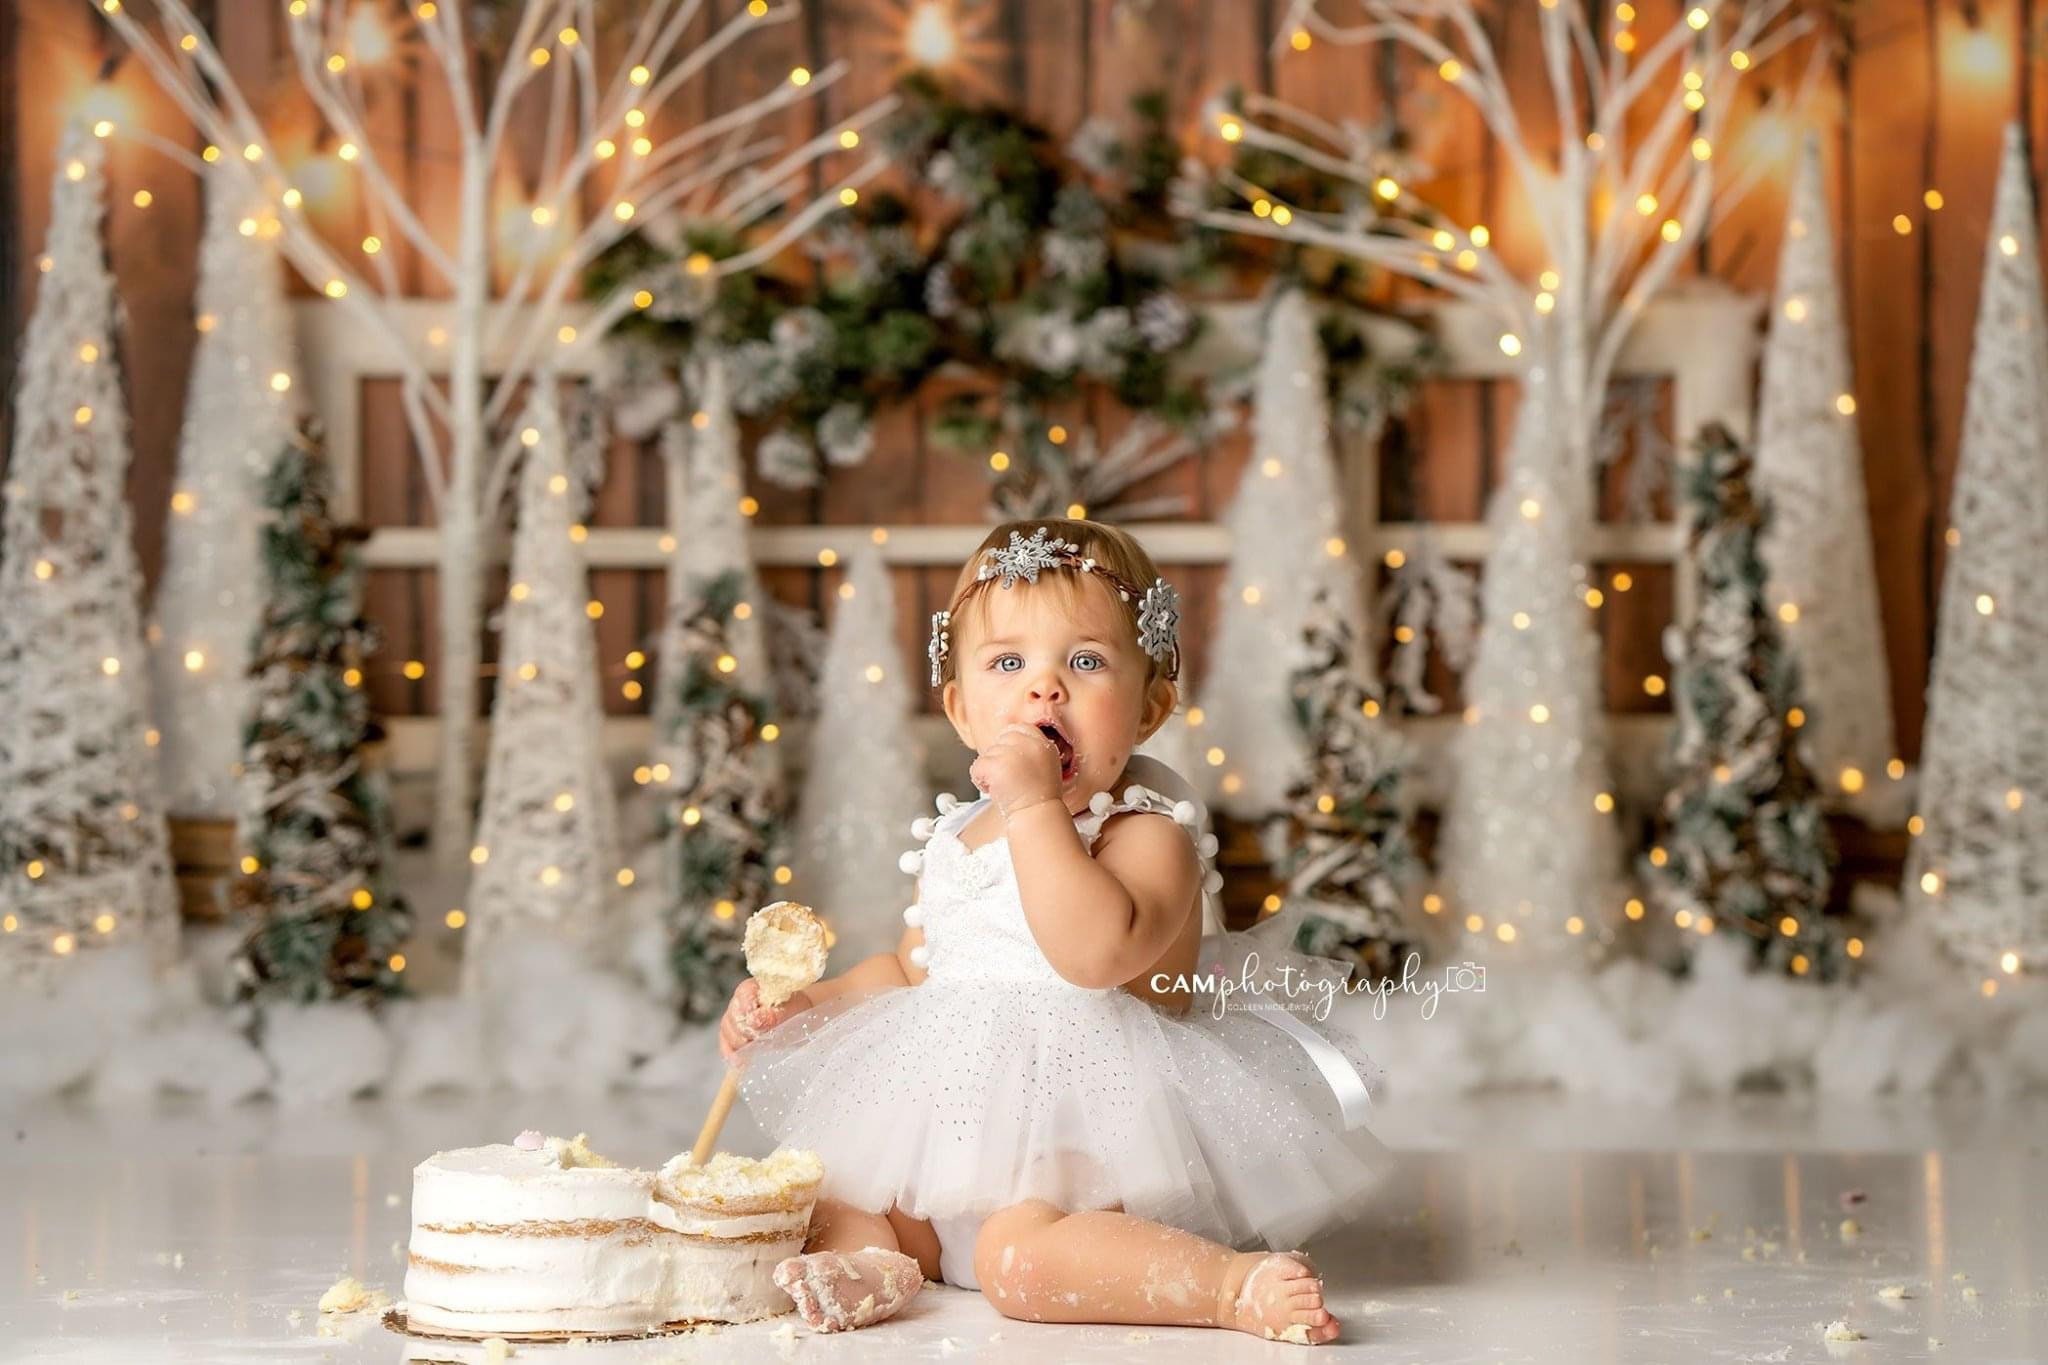 Baby Girls Snowflake 1st Birthday Outfits Romper Tutu Skirt Headband Winter Party Clothes Cake Smash for Photo Props 